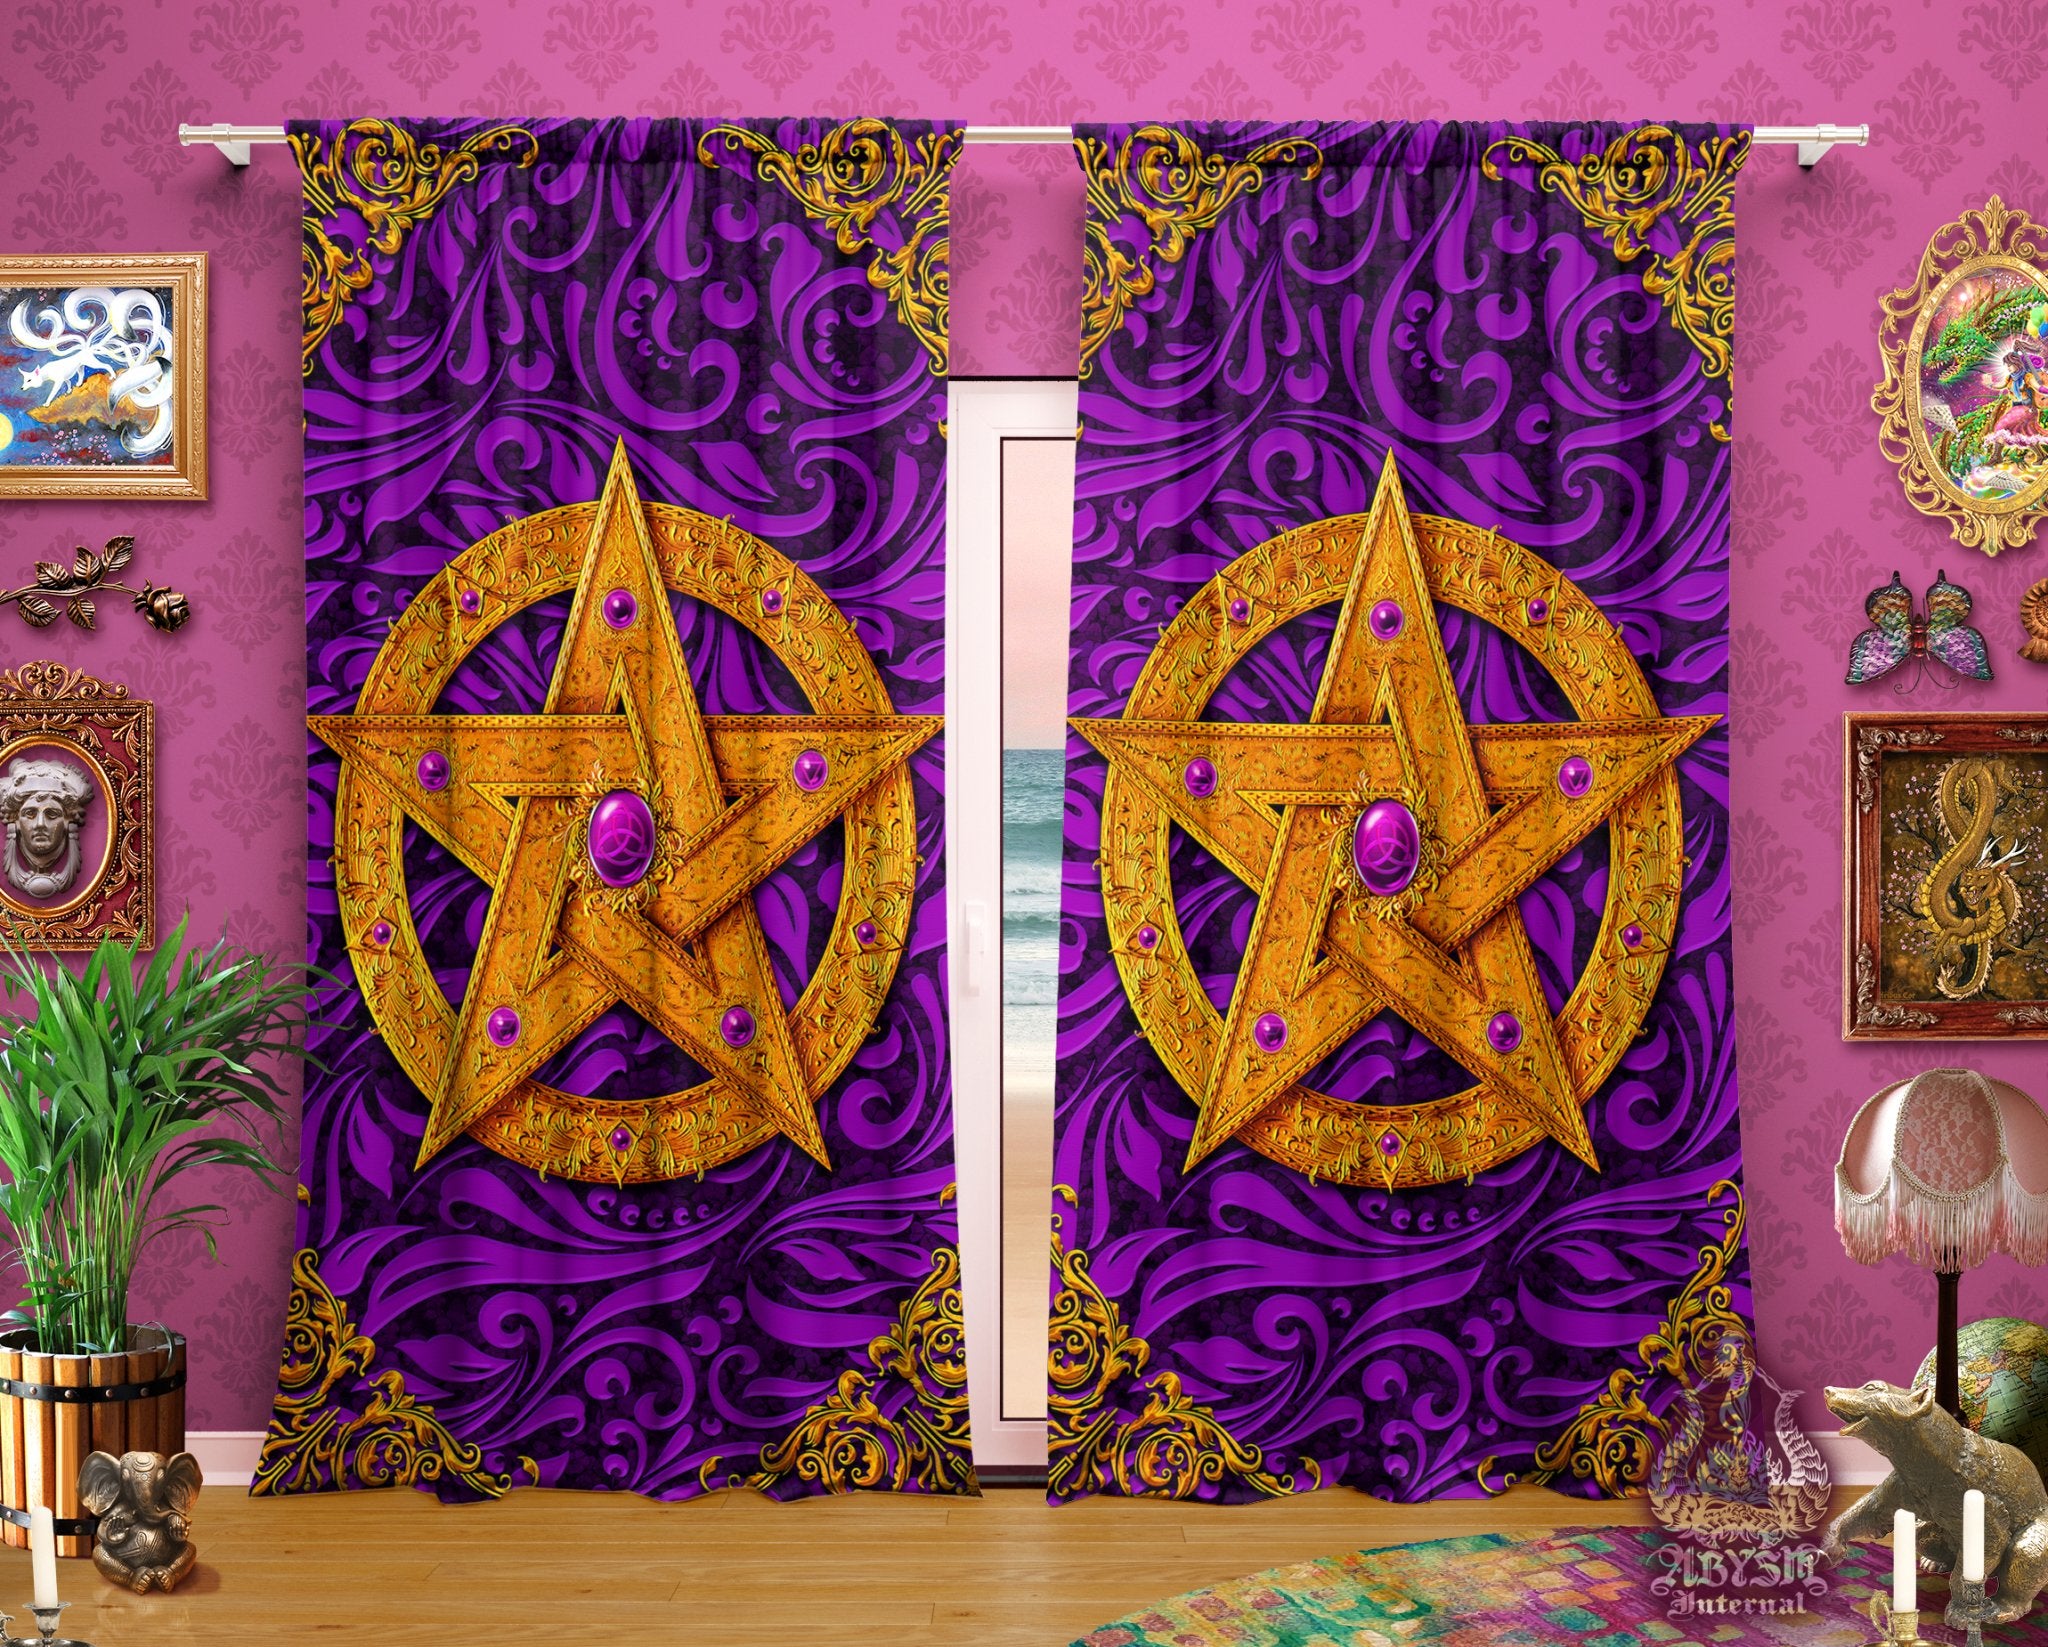 Wiccan Curtains, 50x84' Printed Window Panels, Pentacle, Pagan Room Decor, Art Print, Funky and Eclectic Home Decor - Purple, Green, Blue and Red, 4 Colors - Abysm Internal